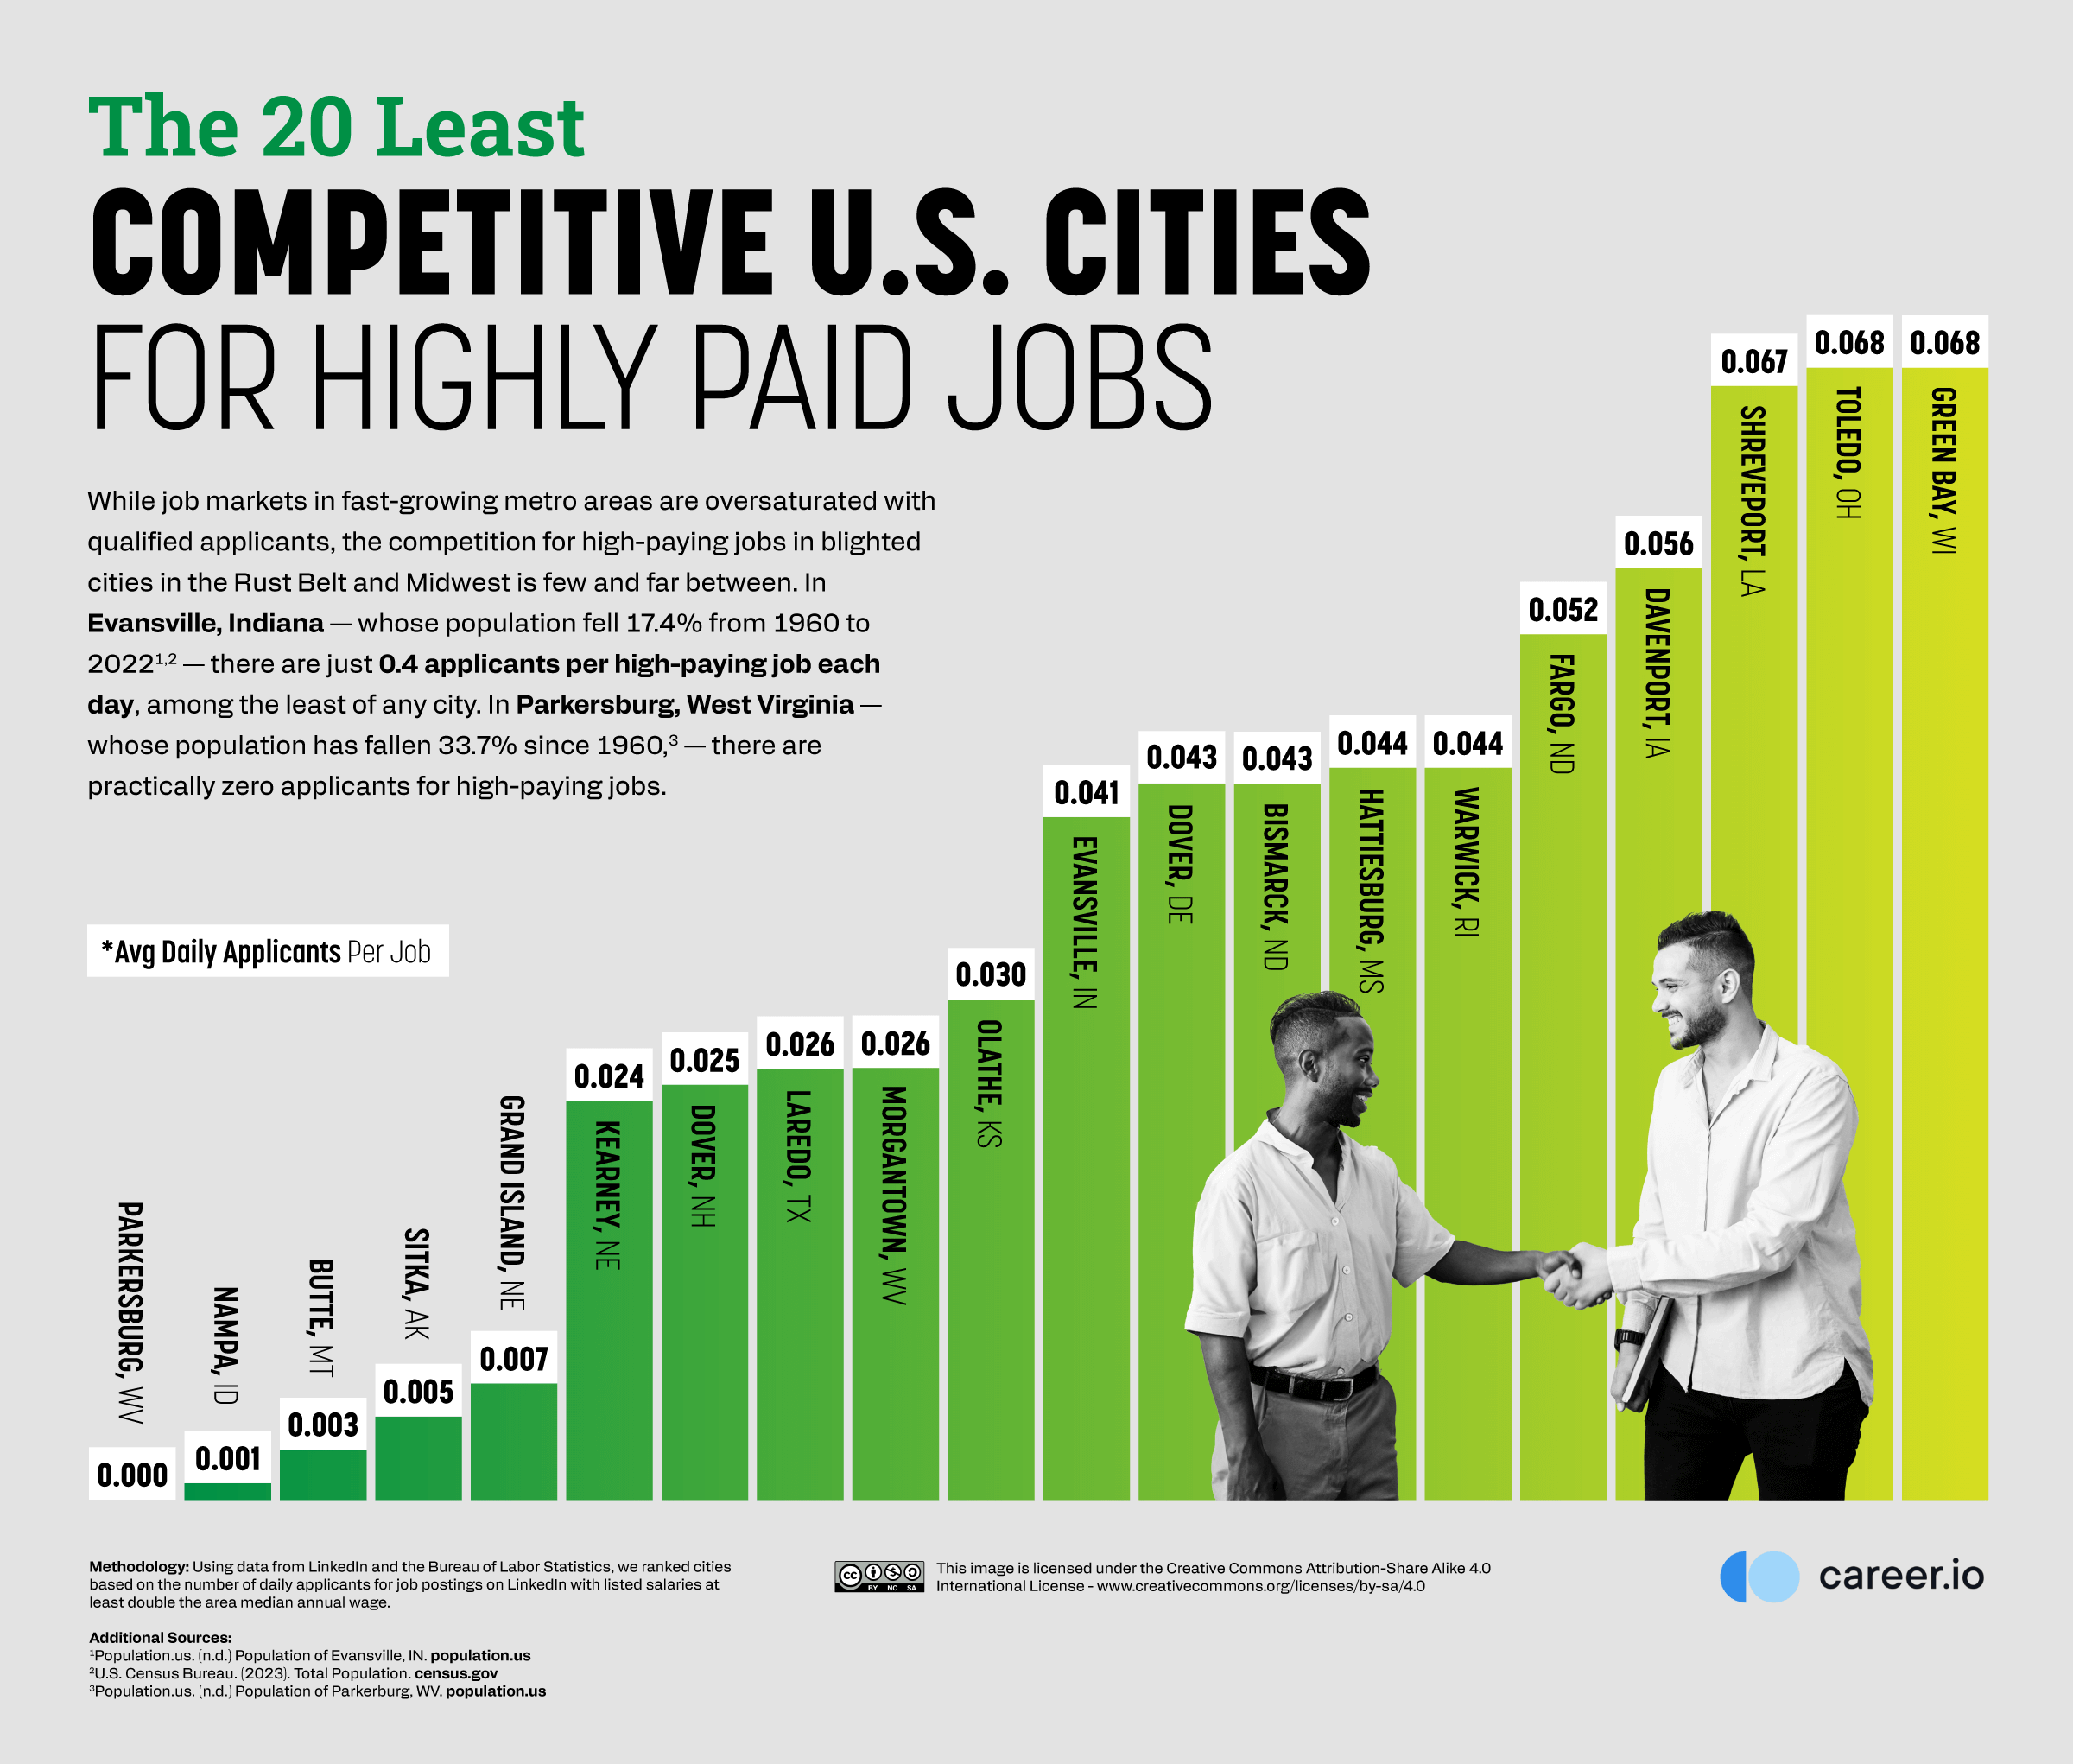 03_The-20-Least-Competitive-US-Cities-for-Highly-Paid-Jobs.png